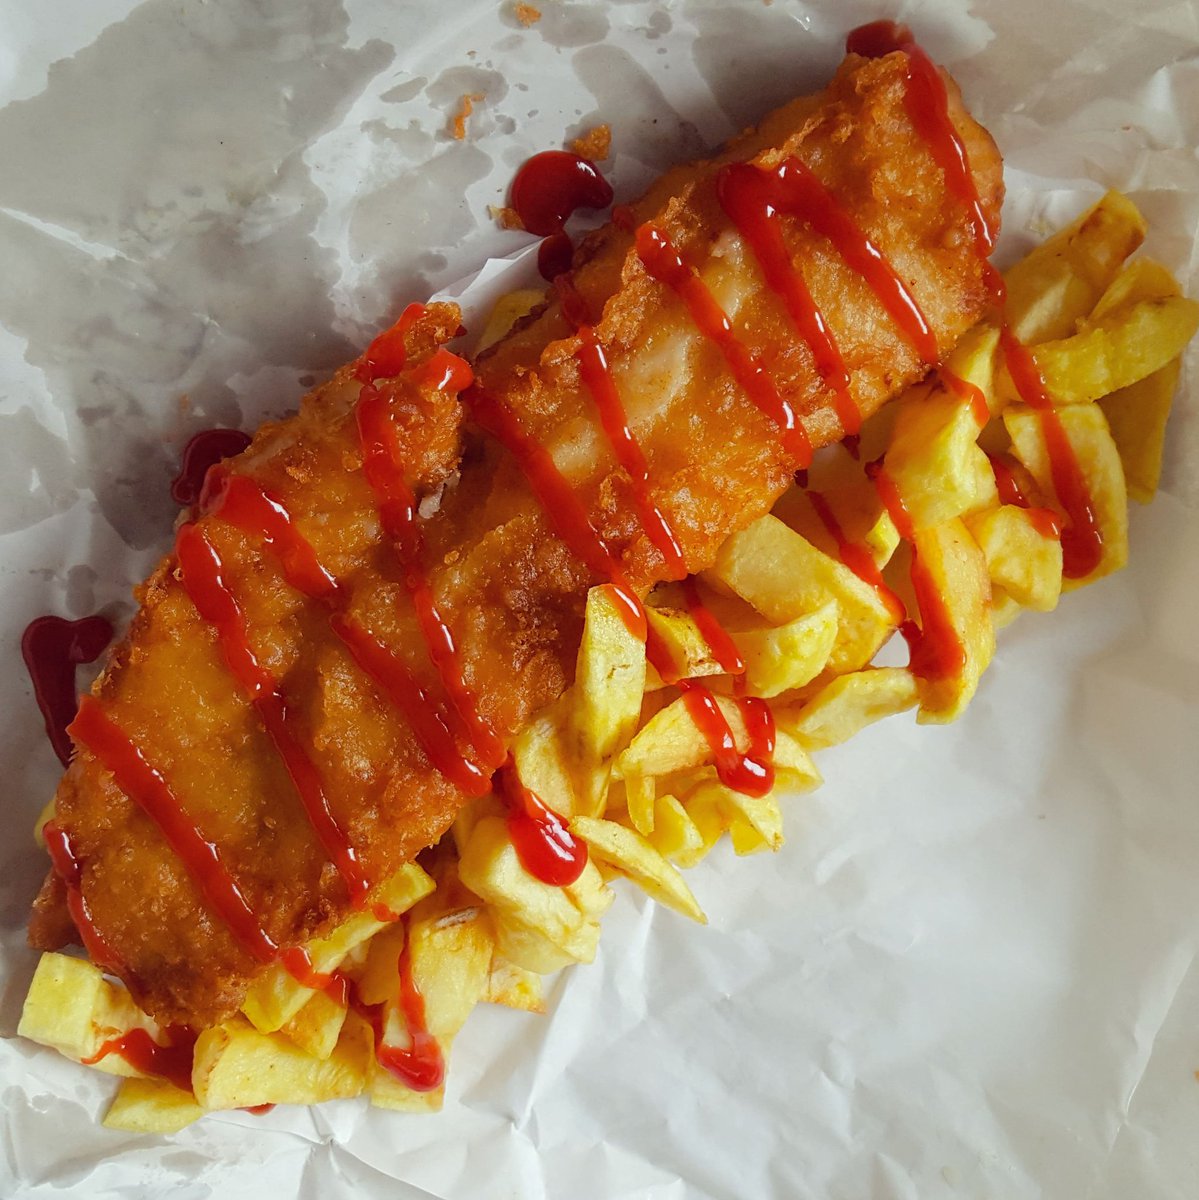 Happy Friday People!! 🙌
Some Fish 'N' Chips after my first week at the Gym!! Hope everyone has a good weekend!! 💪😎

#friday #happyfriday #fridayvibes #fridayfeeling #fatfriday #weekend #fish #chips #fishandchips #ketchup
#redsauce #food #britishfood #classicfood #gym #gymlife